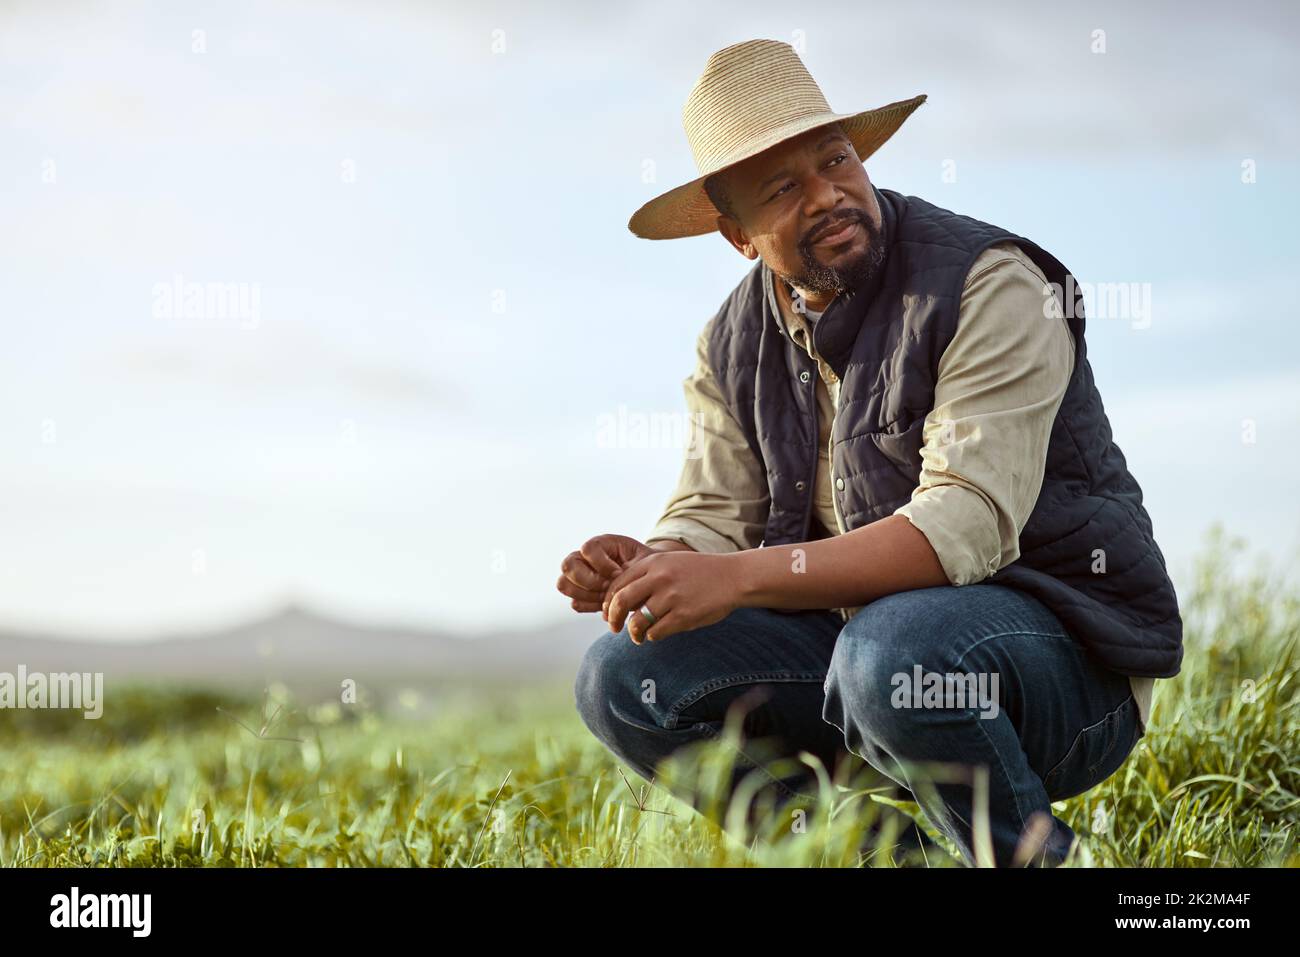 Theres patience and then theres farmer patience. Shot of a mature man working on a farm. Stock Photo